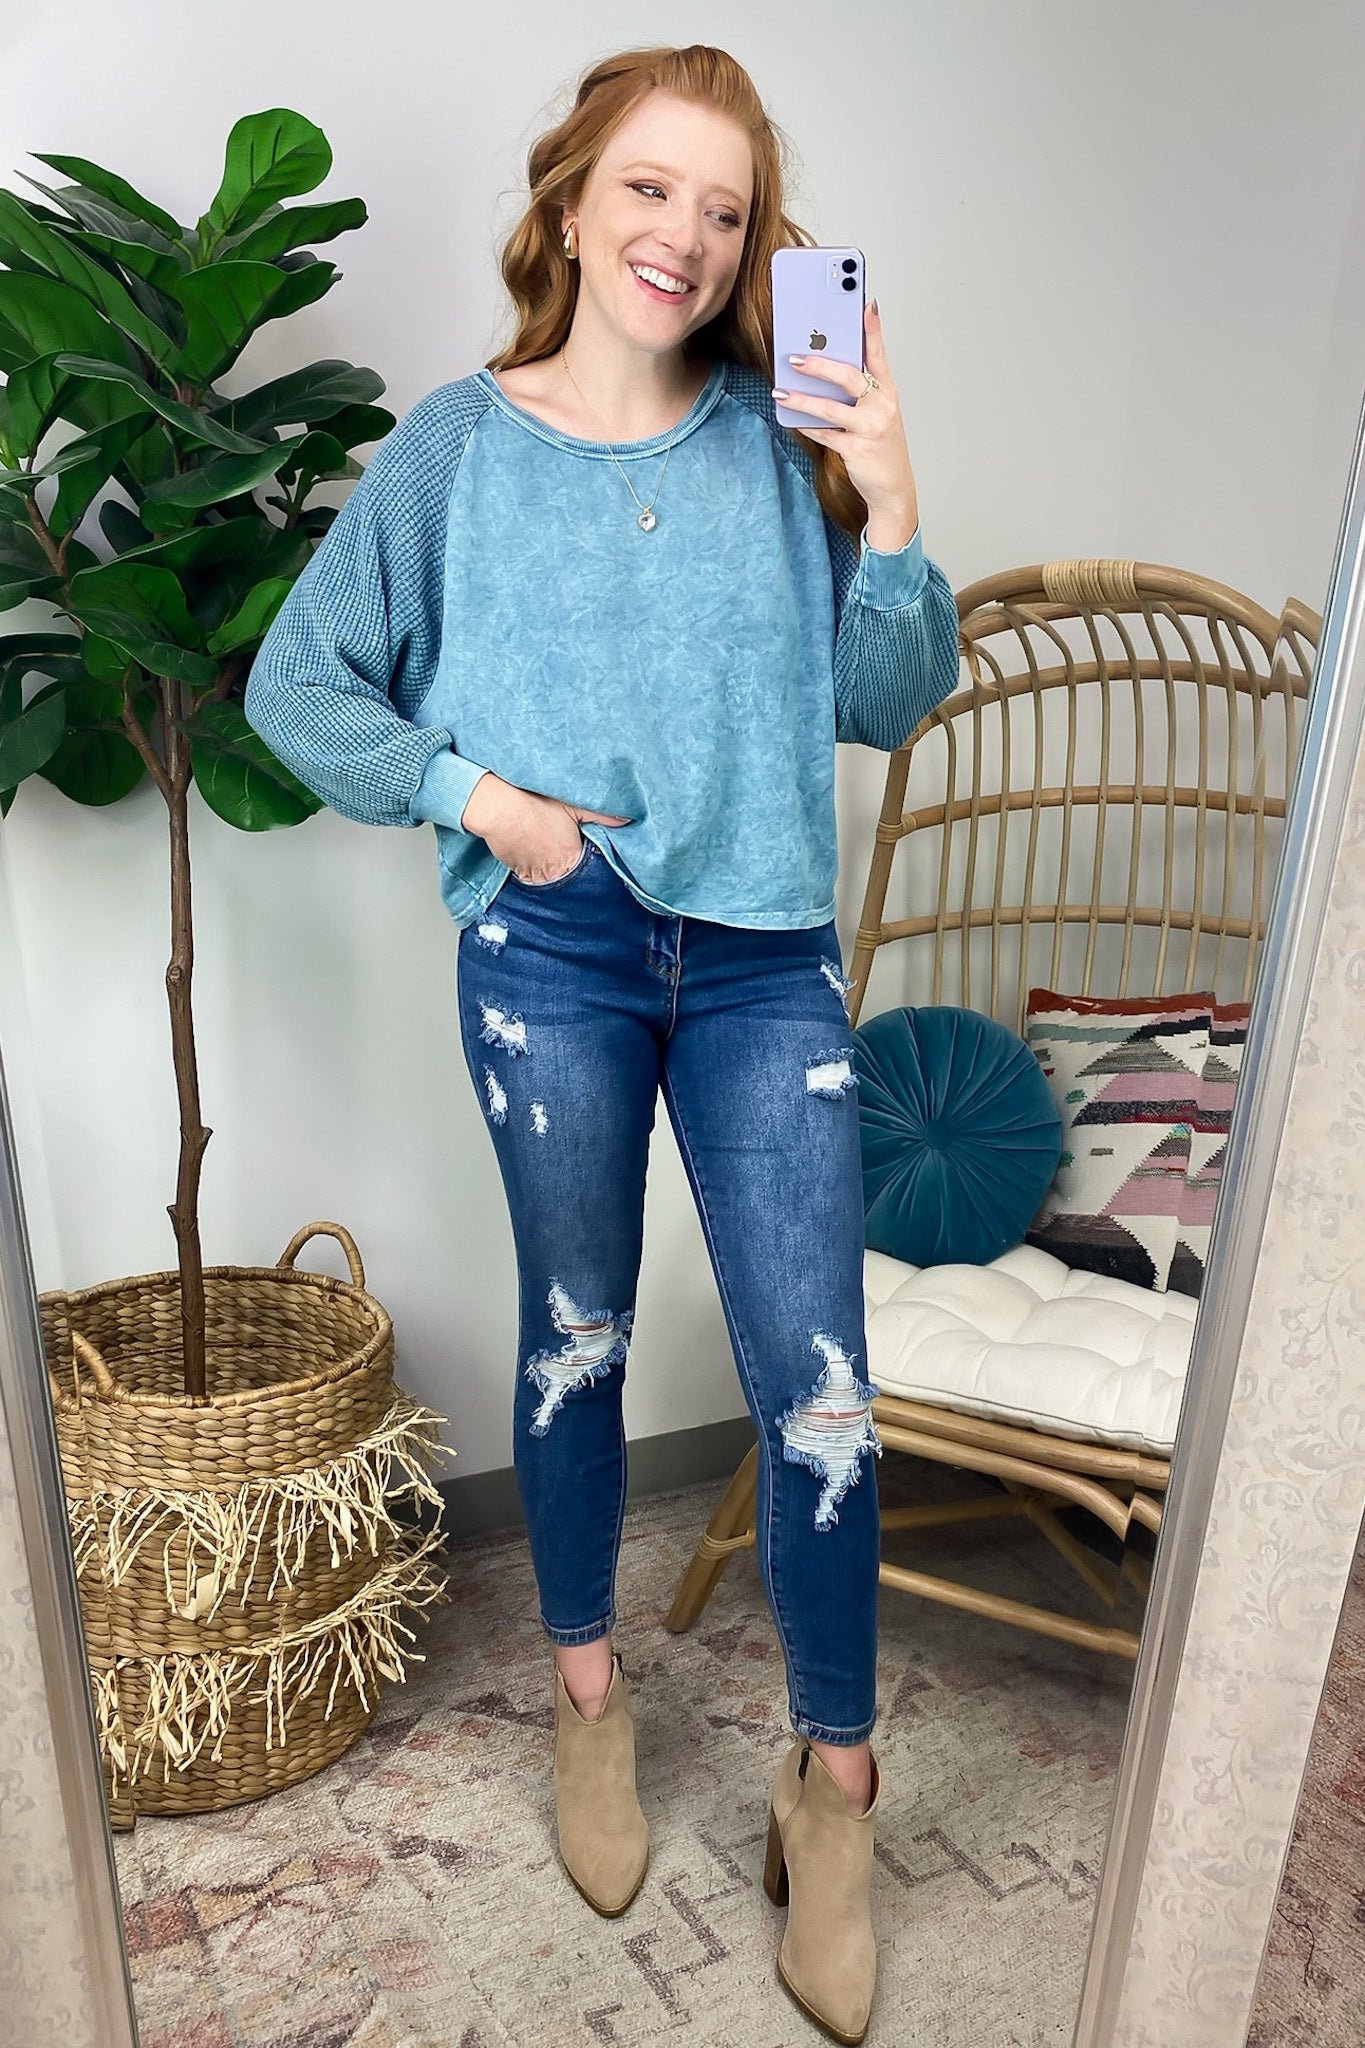  McEntire Mineral Washed French Terry Contrast Top - FINAL SALE - Madison and Mallory